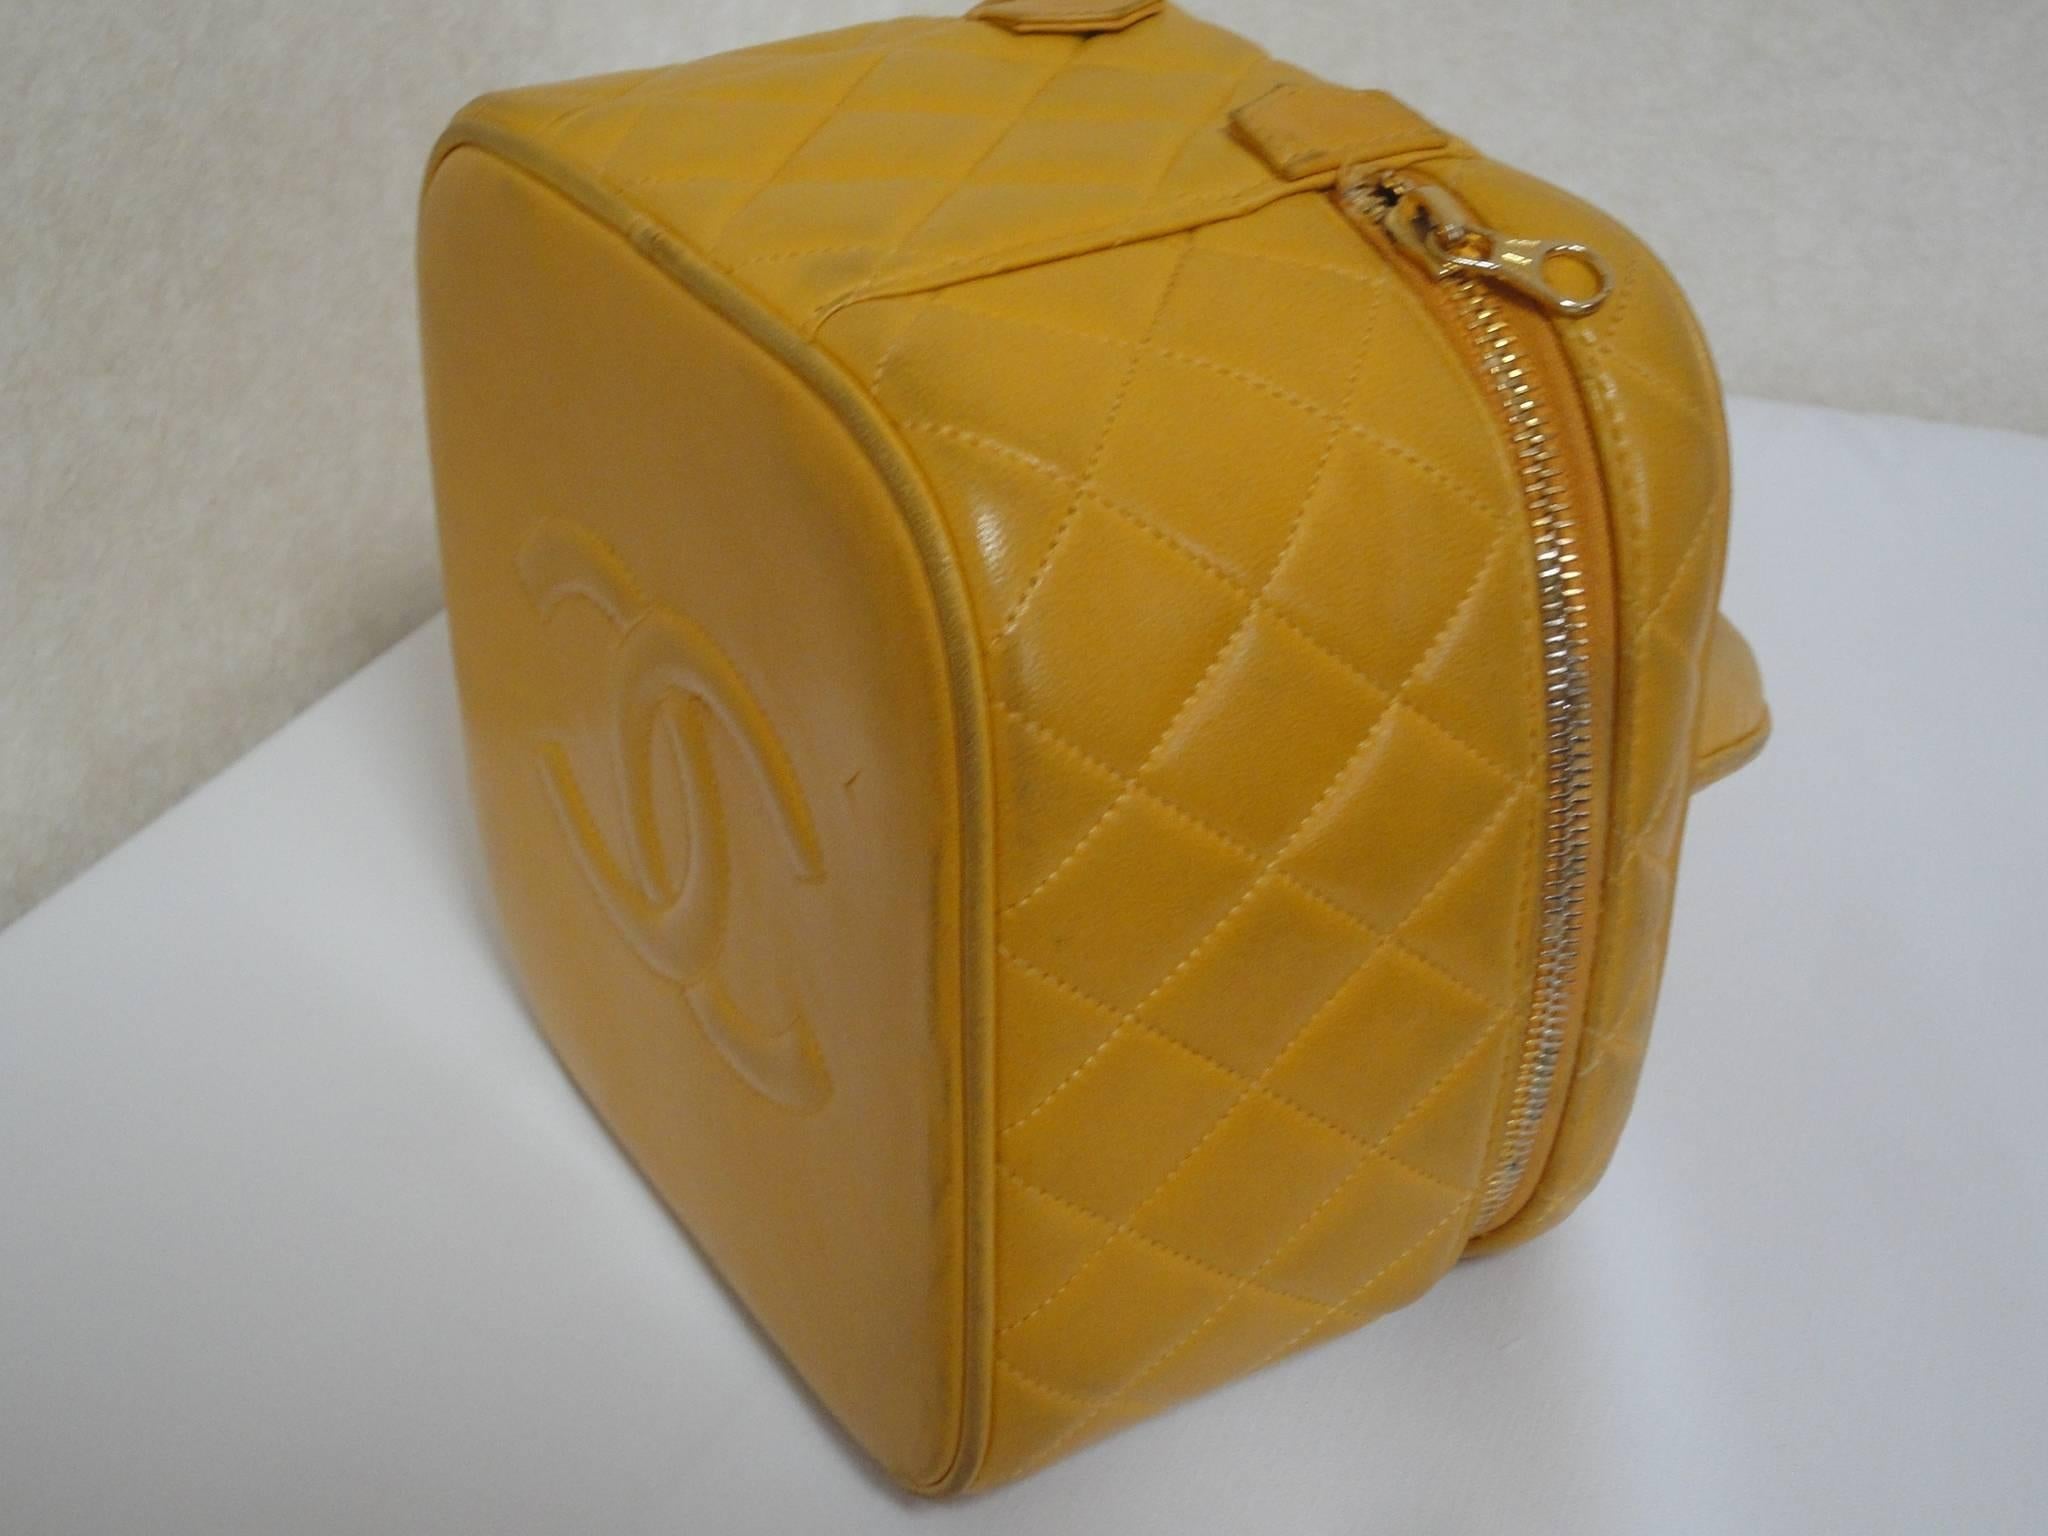 Vintage CHANEL yellow quilted lambskin cosmetic, make up case, mini handbag 1